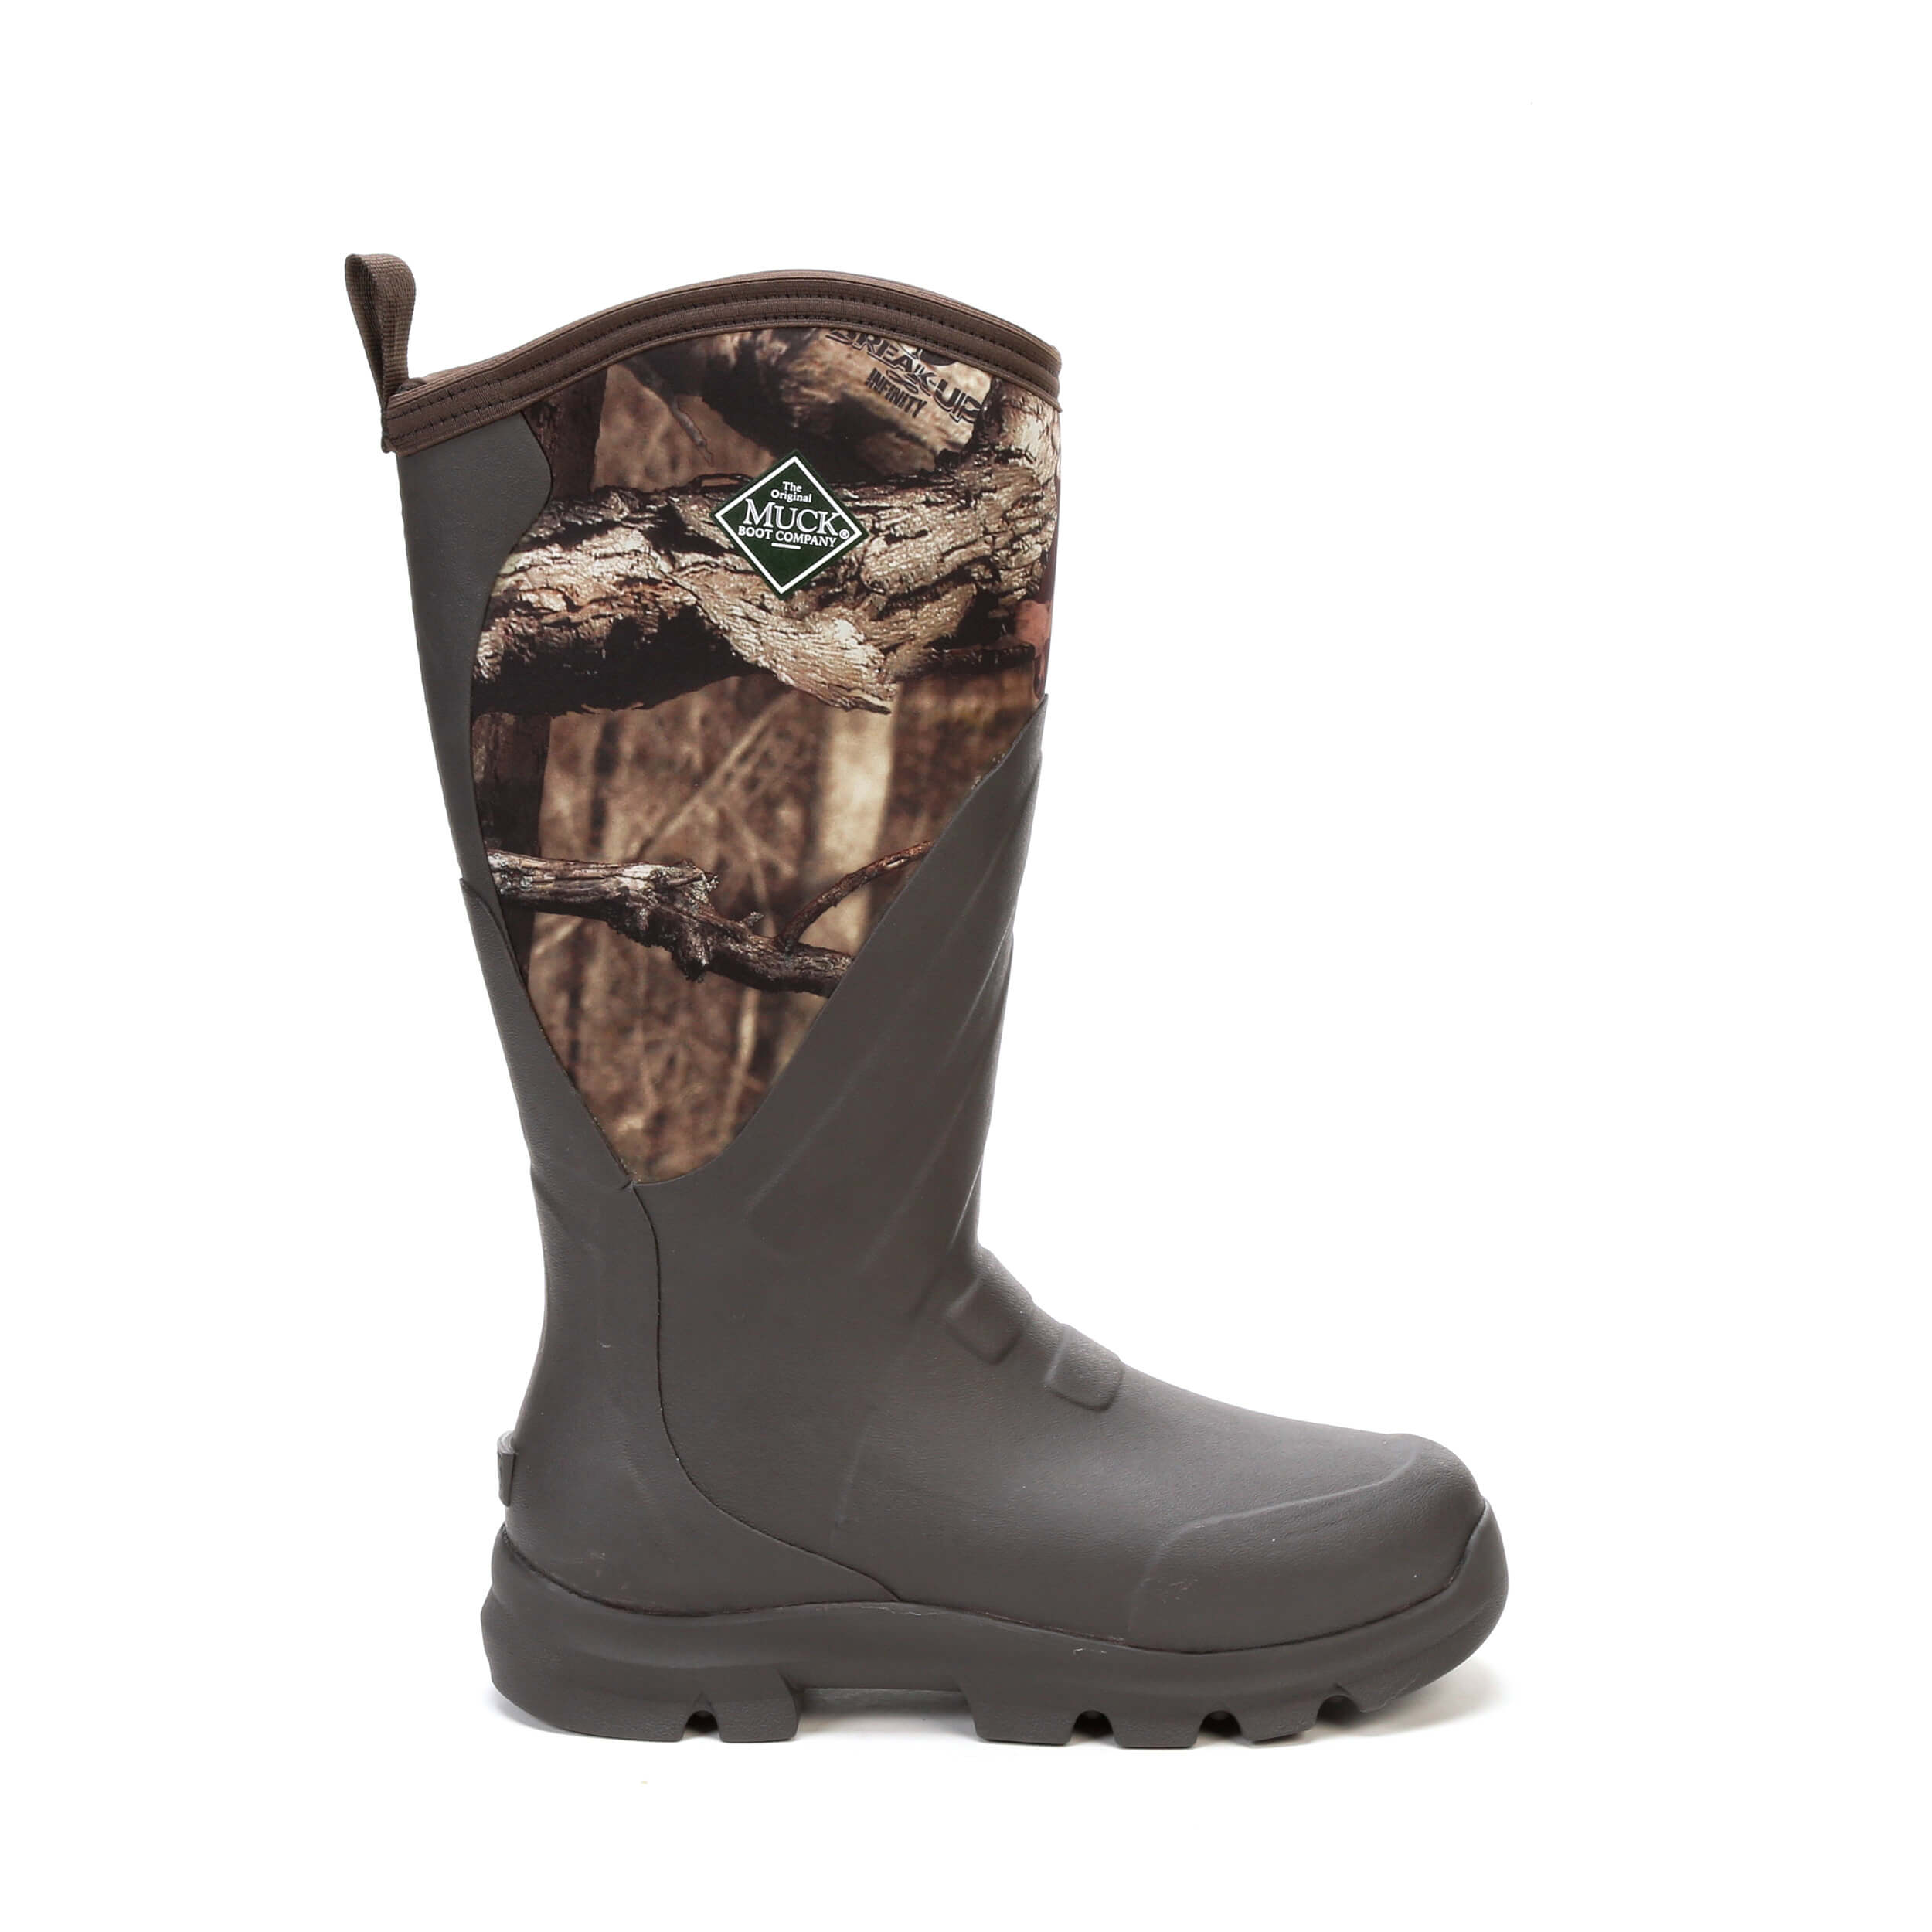 Сапоги Muck Boot Woody grit 